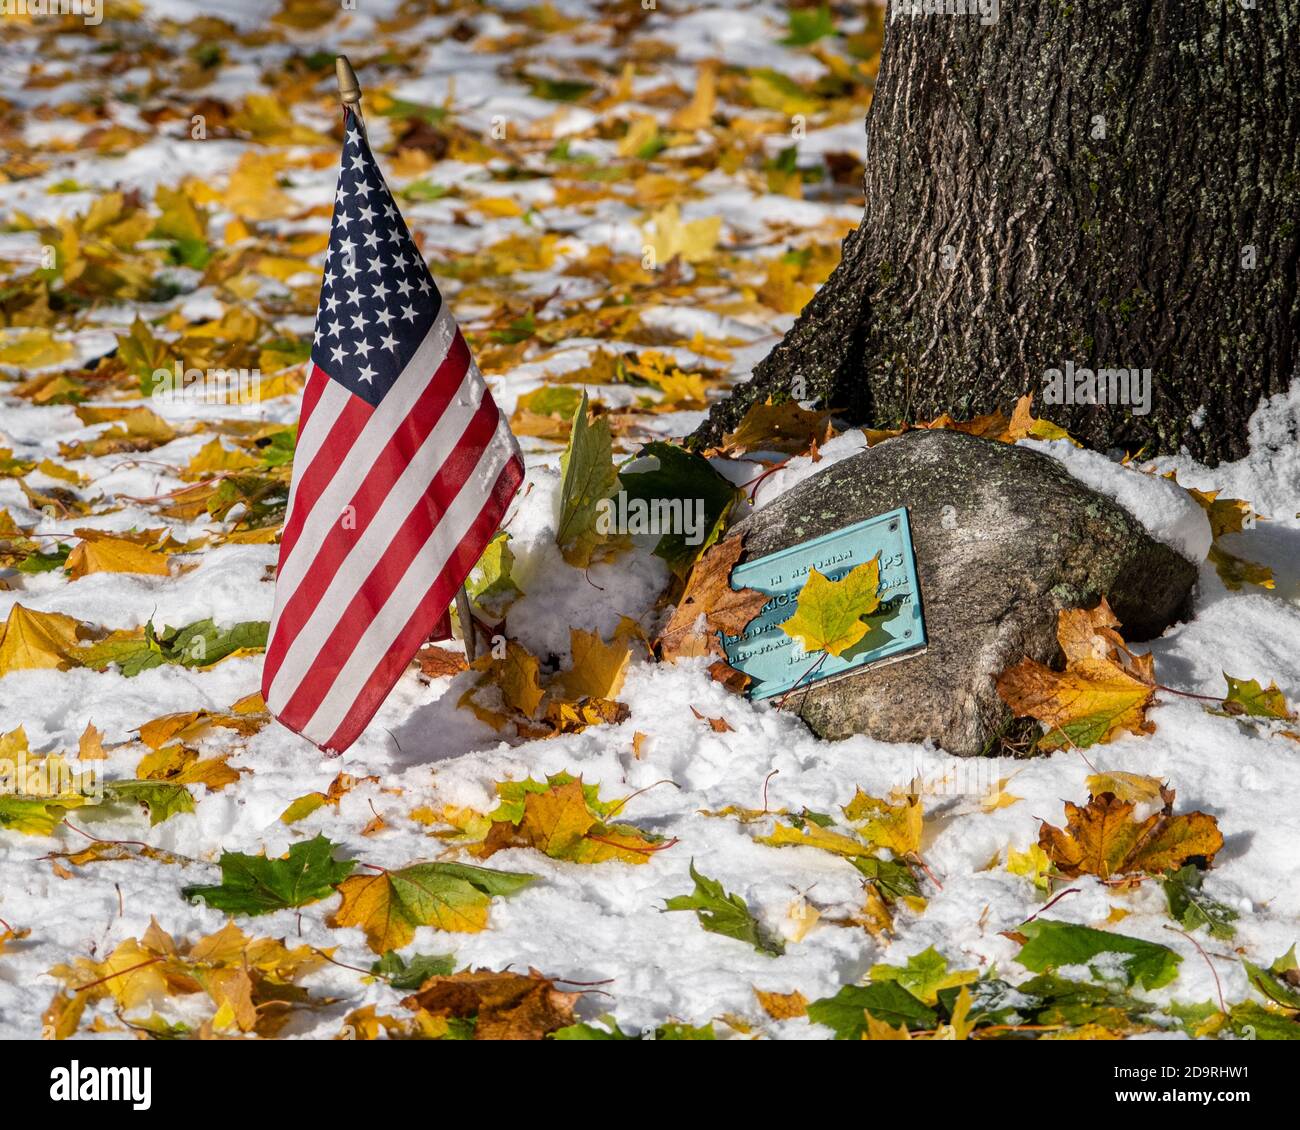 An American flag  marks a small monument on the Petersham, MA town common Stock Photo